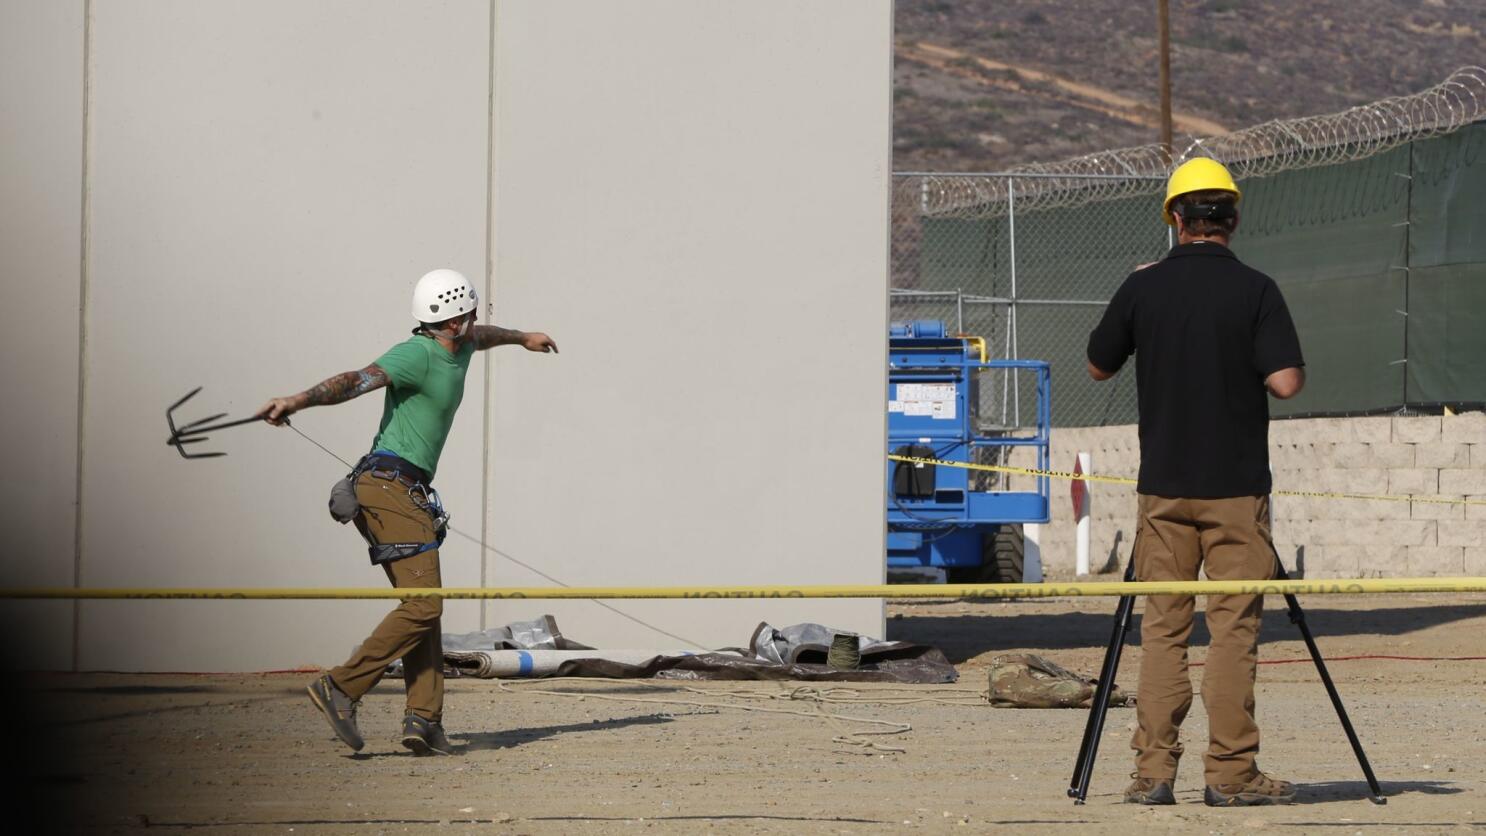 Grappling hooks and harnesses: Agents put border wall prototypes to the  test - Los Angeles Times